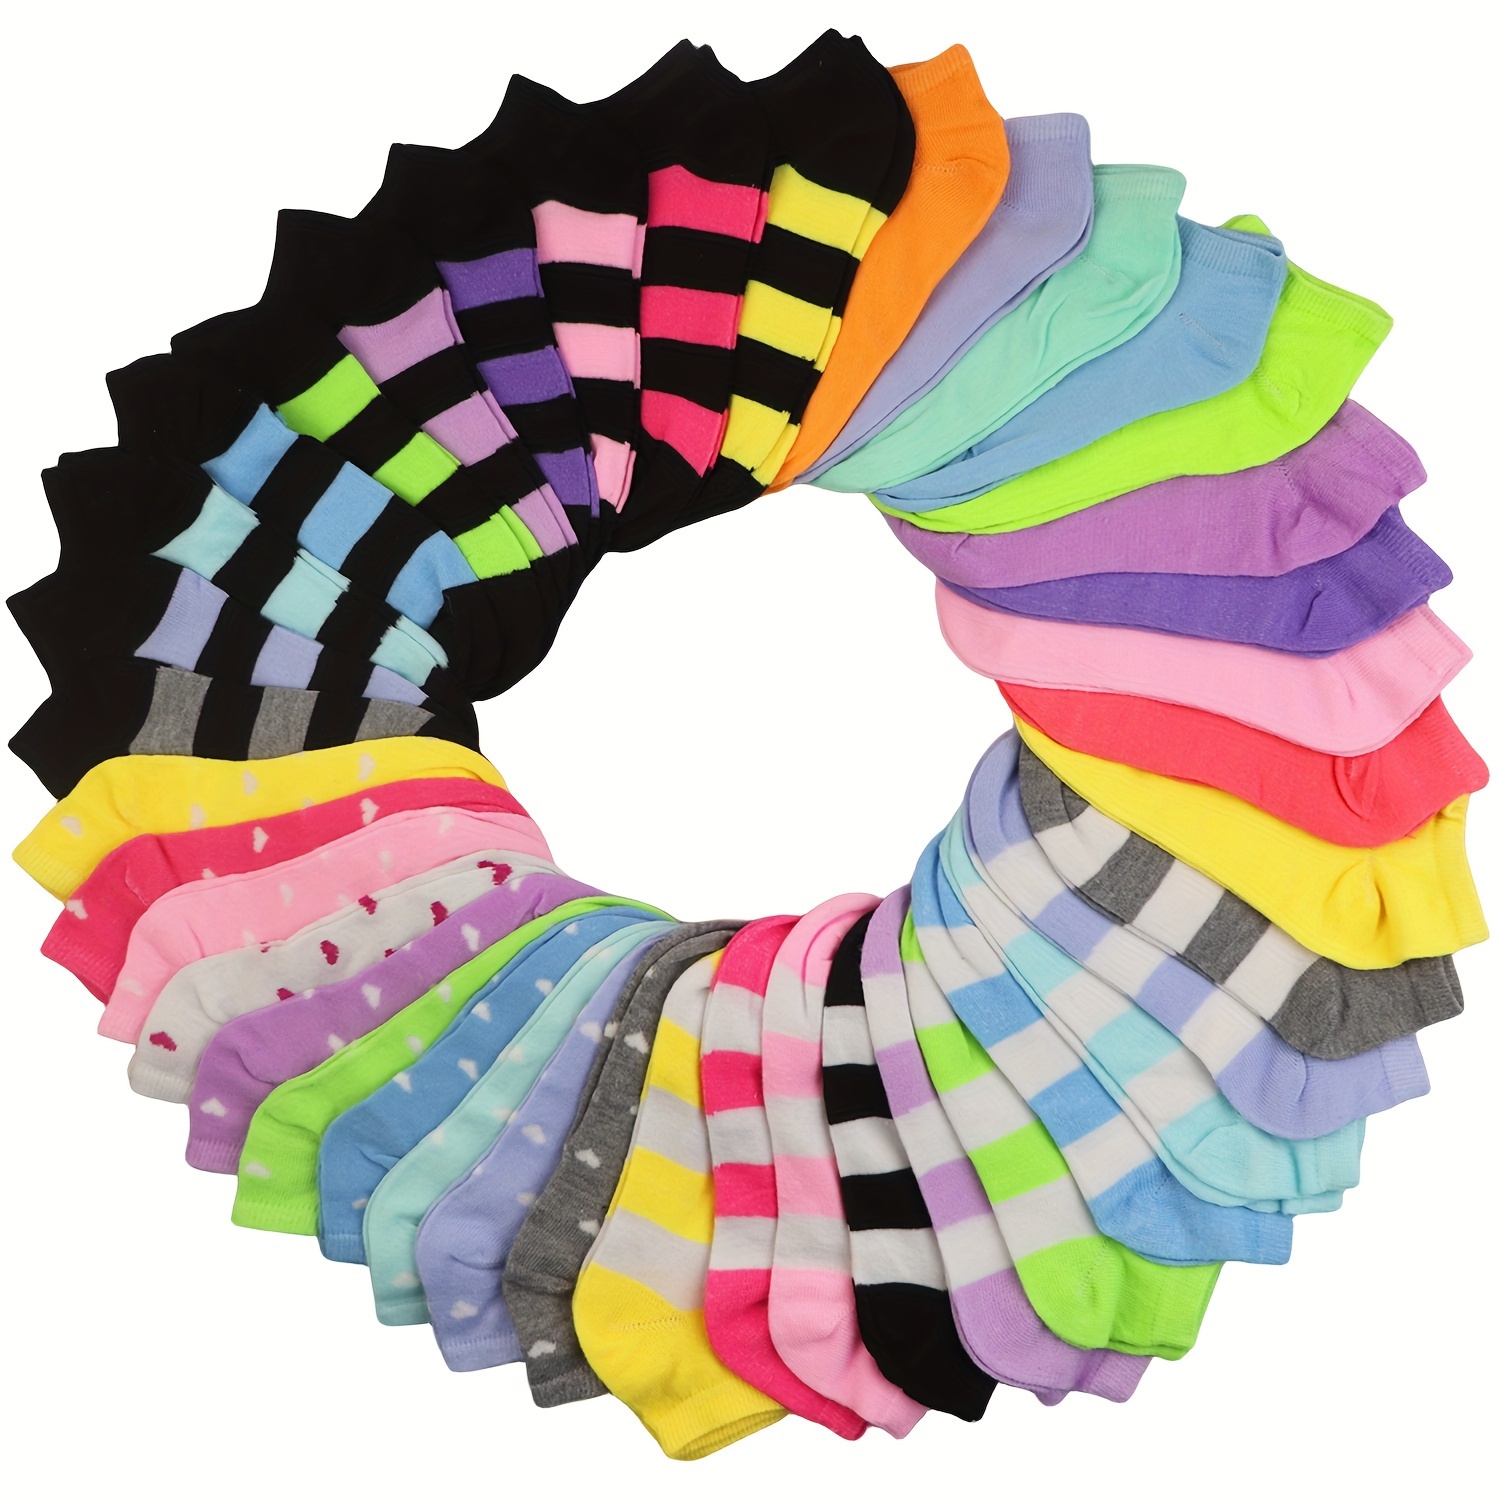 

10 Pairs Music Festival Striped Short Socks, Casual & Comfortable All-match Low Cut Ankle Socks, Women's Stockings & Hosiery